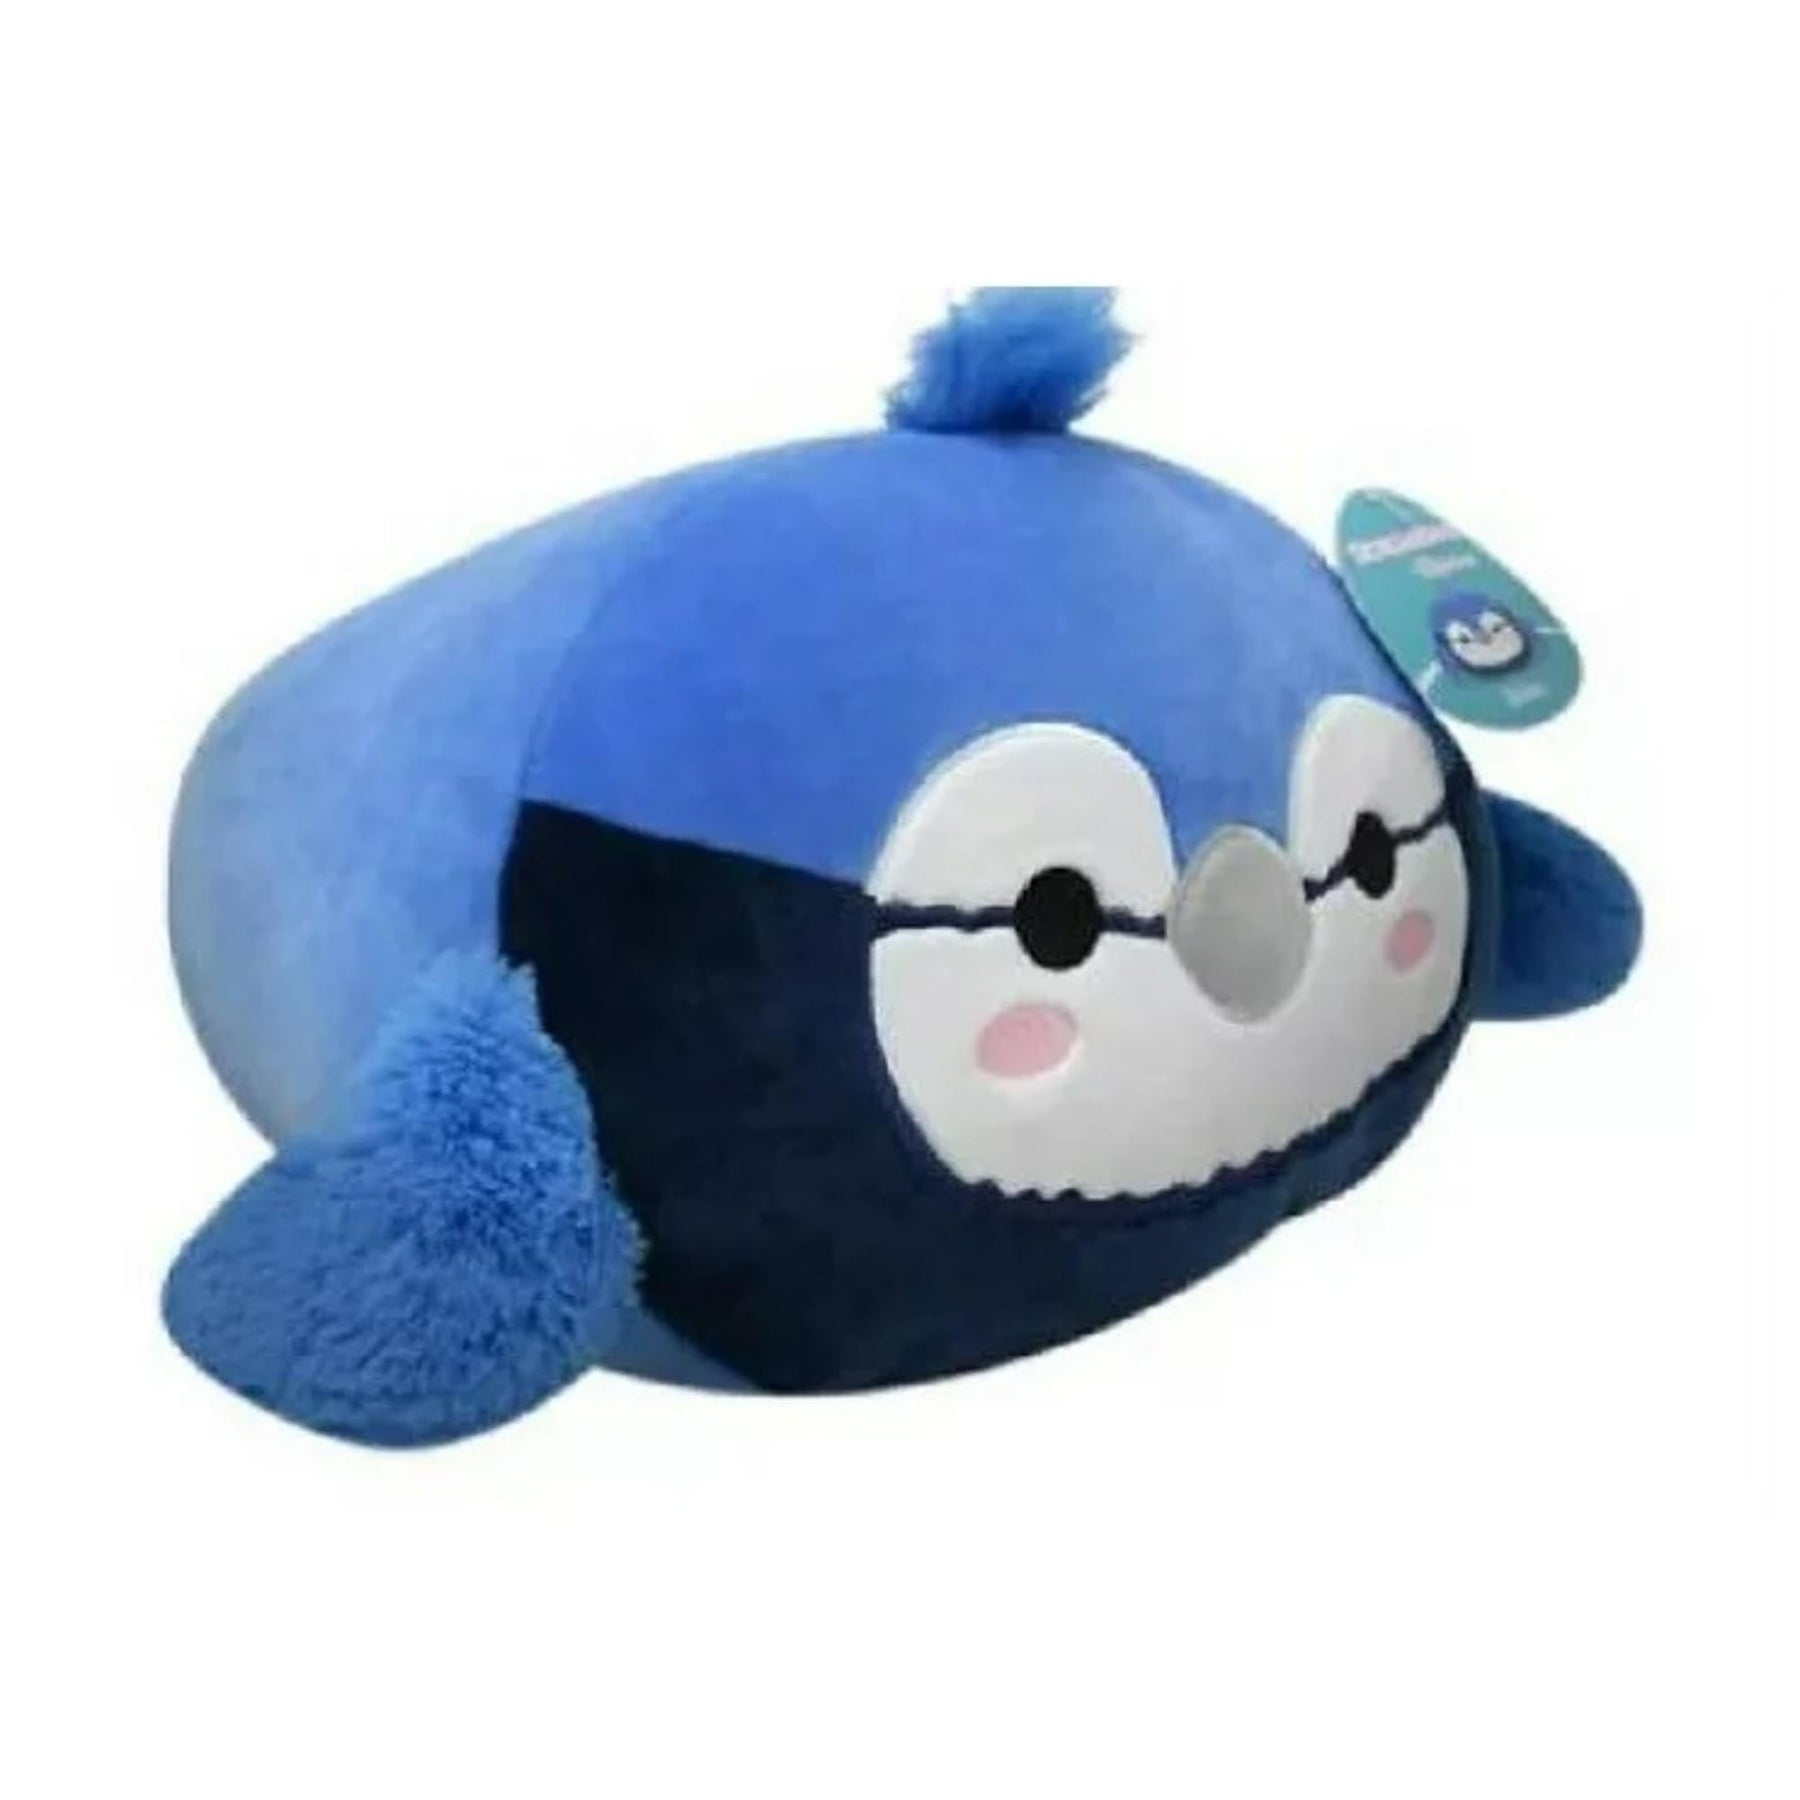 Squishmallow 8 Inch Stackable Plush | Babs The Blue Jay